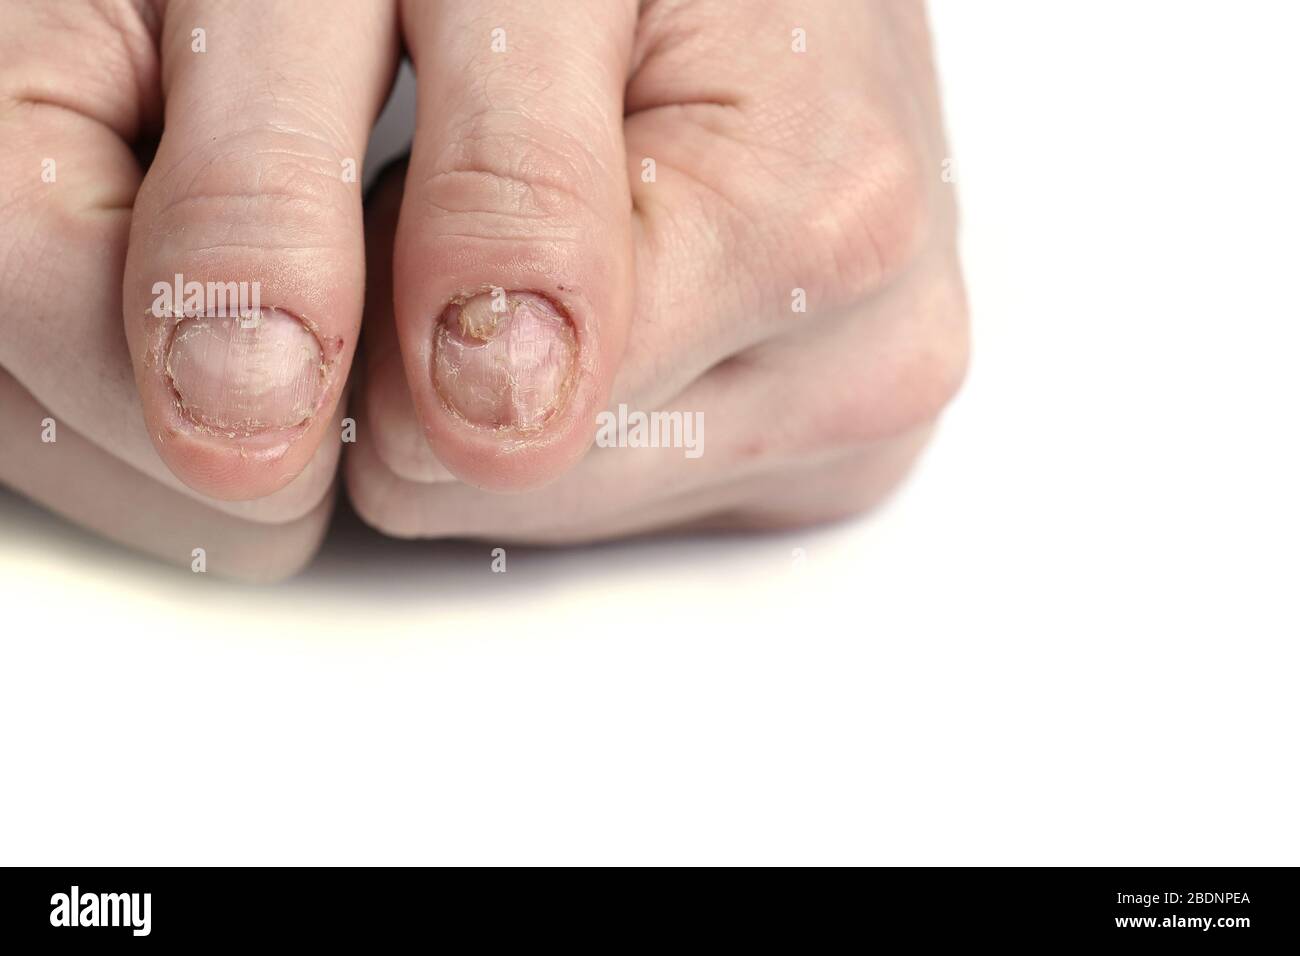 Fungus Infection on Nails Hand, Finger with onychomycosis, A toenail fungus.  - soft focus Stock Photo by ©n.nonthamand.gmail.com 120822644